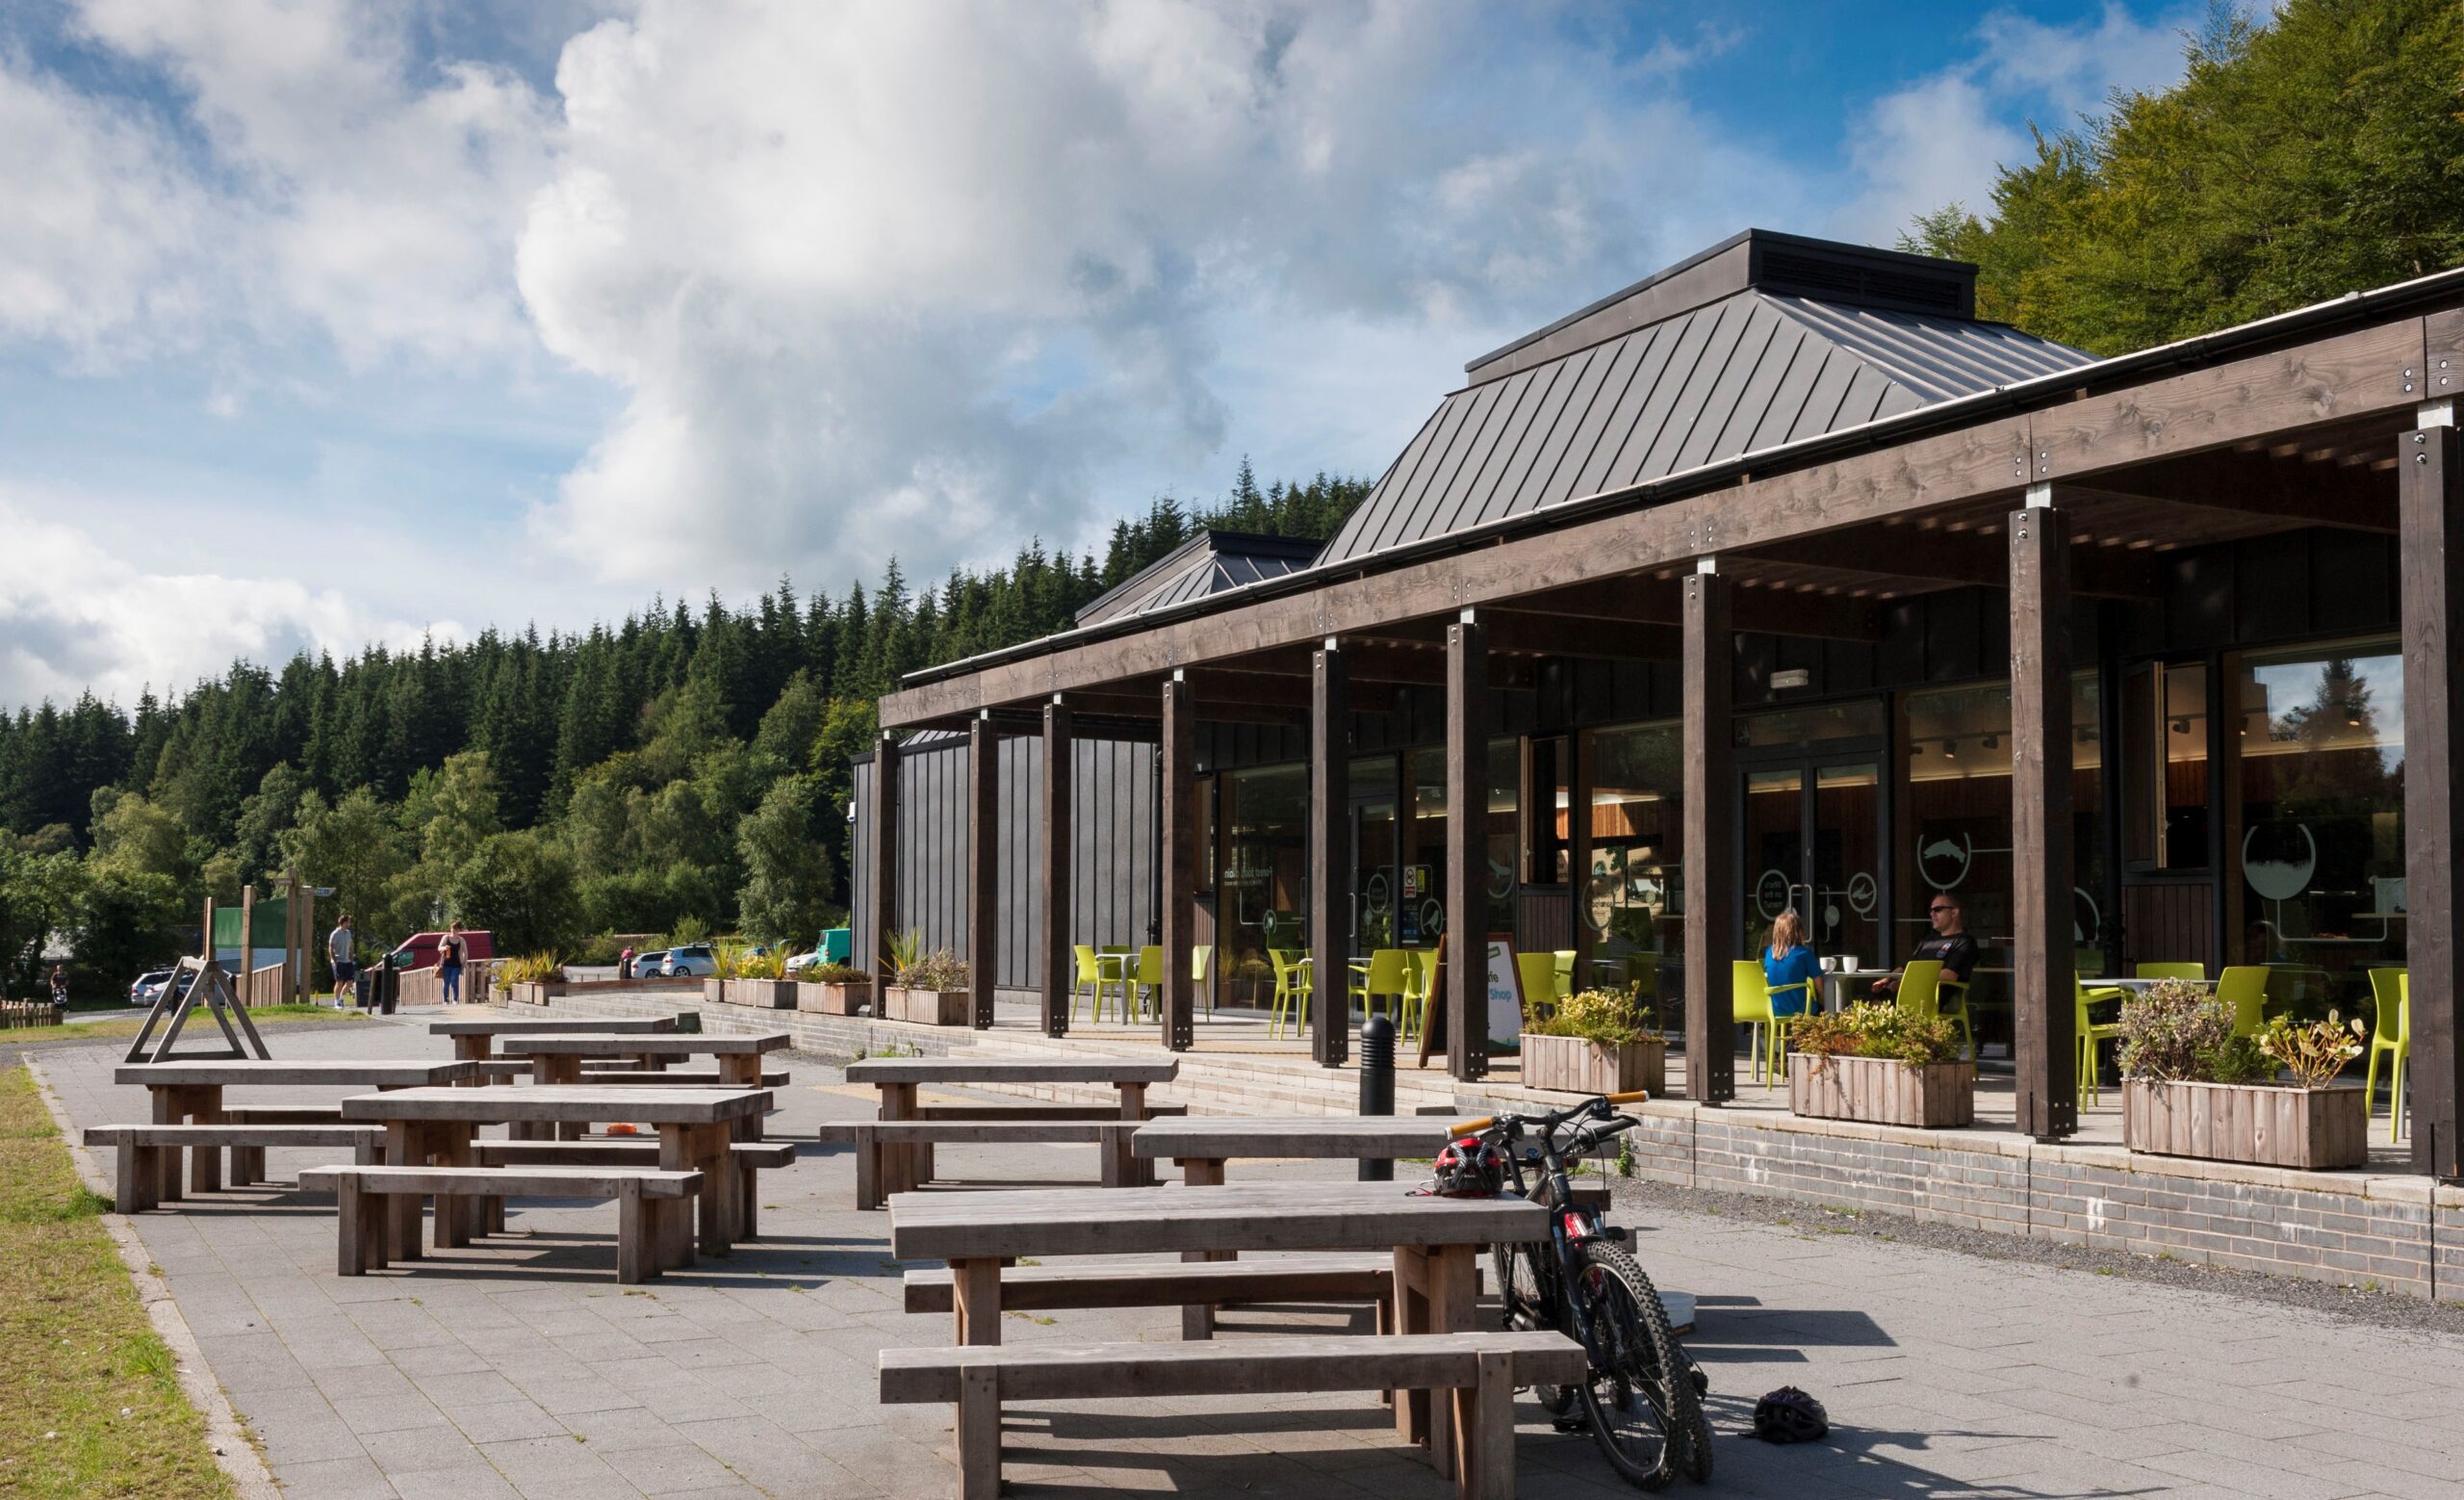 Image showing Kirroughtree Visitor Centre, Galloway Forest Park